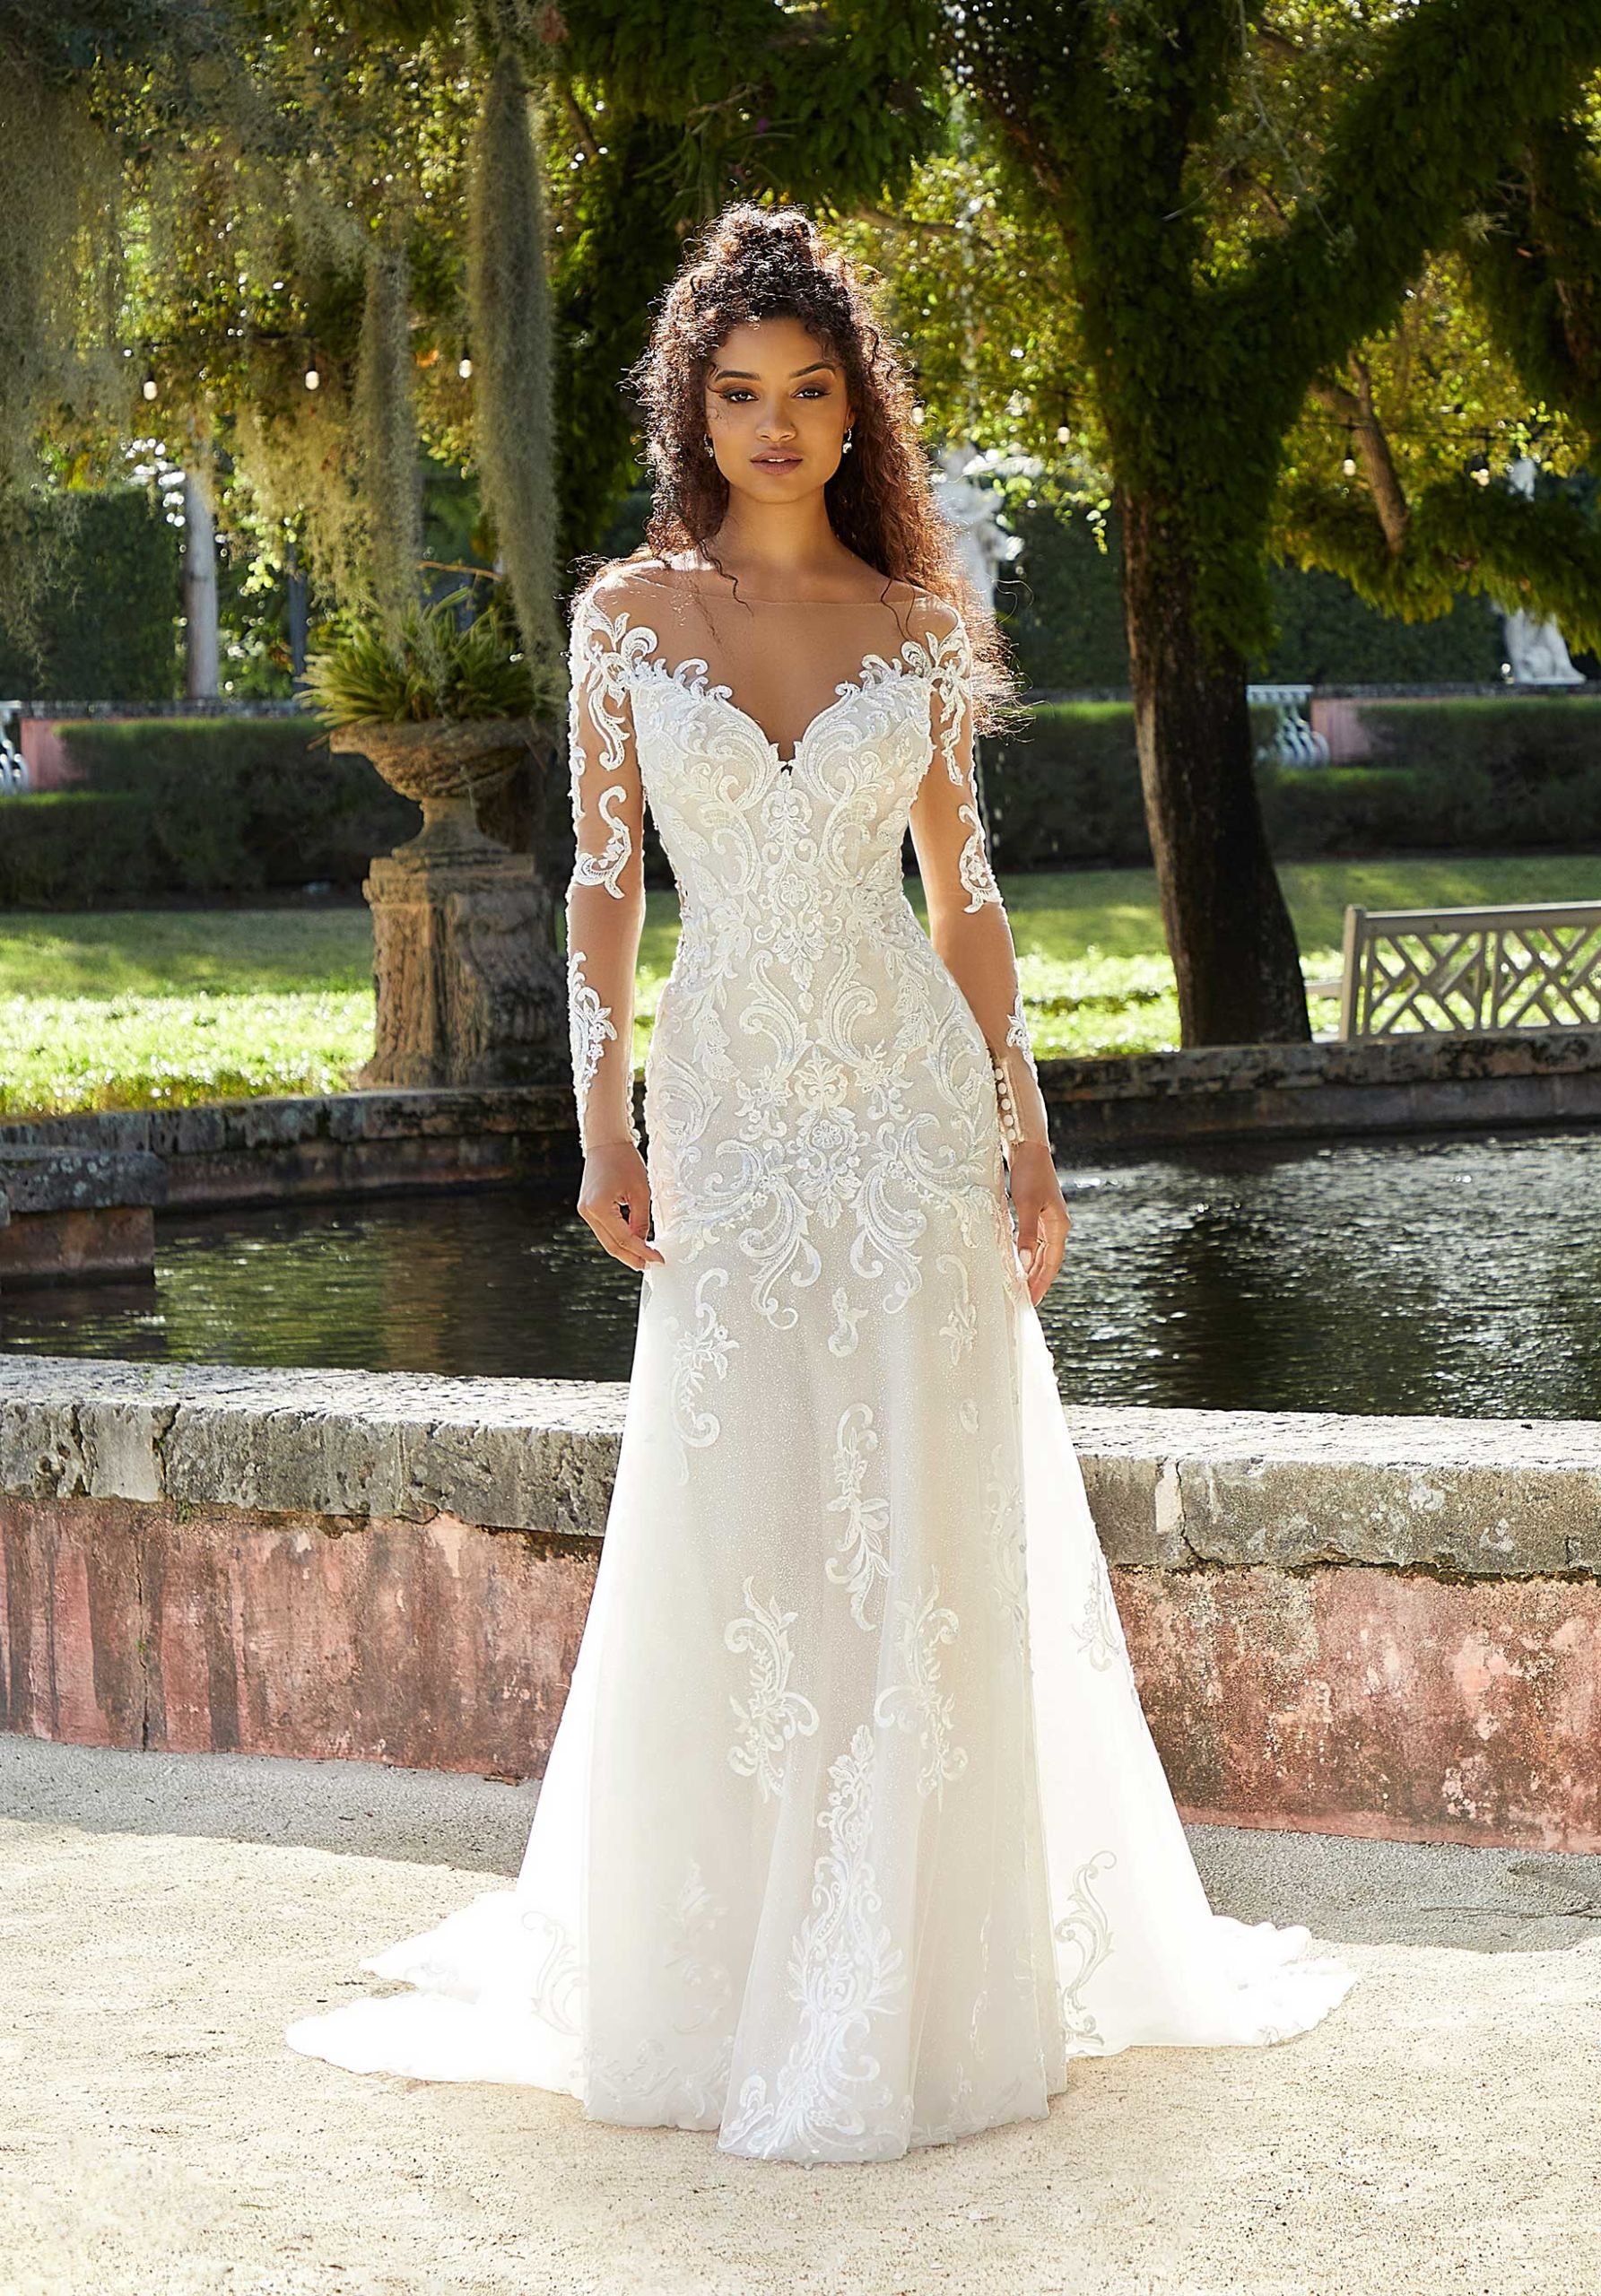 https://crownbridal.com/wp-content/uploads/2022/05/product_img_2481_feature_img-scaled-1.jpg